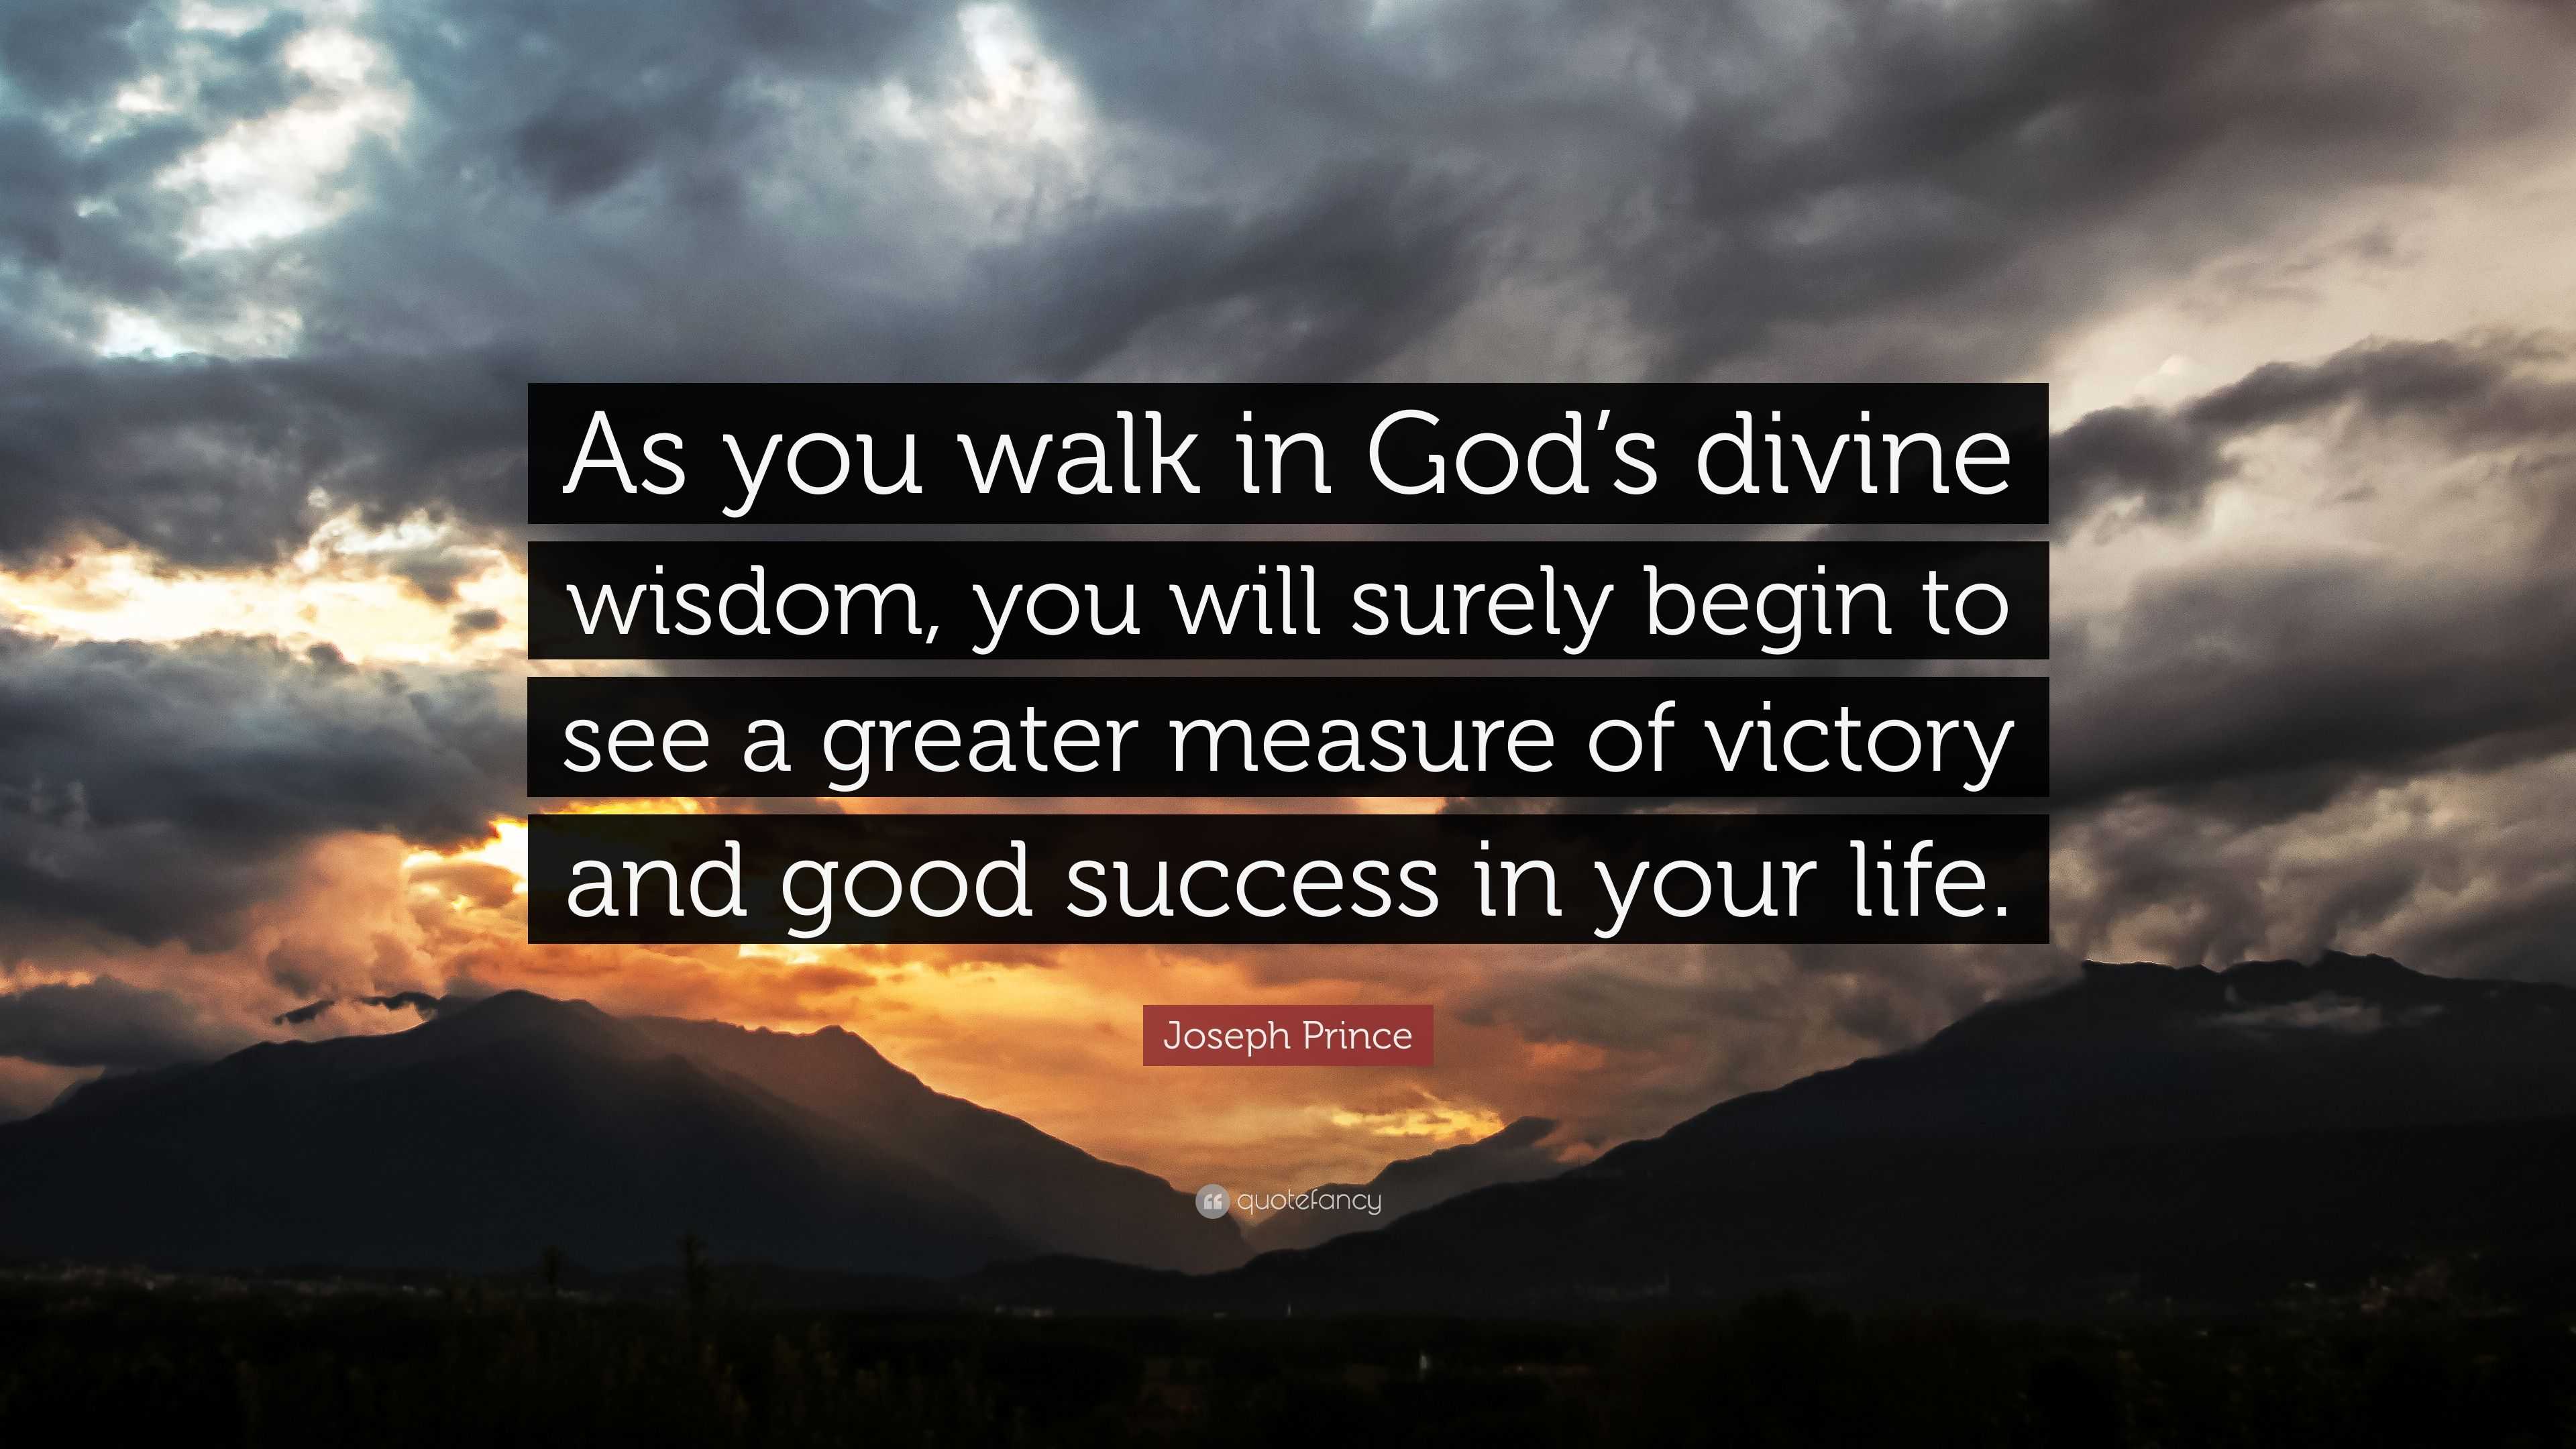 Joseph Prince Quote: “As you walk in God’s divine wisdom, you will ...